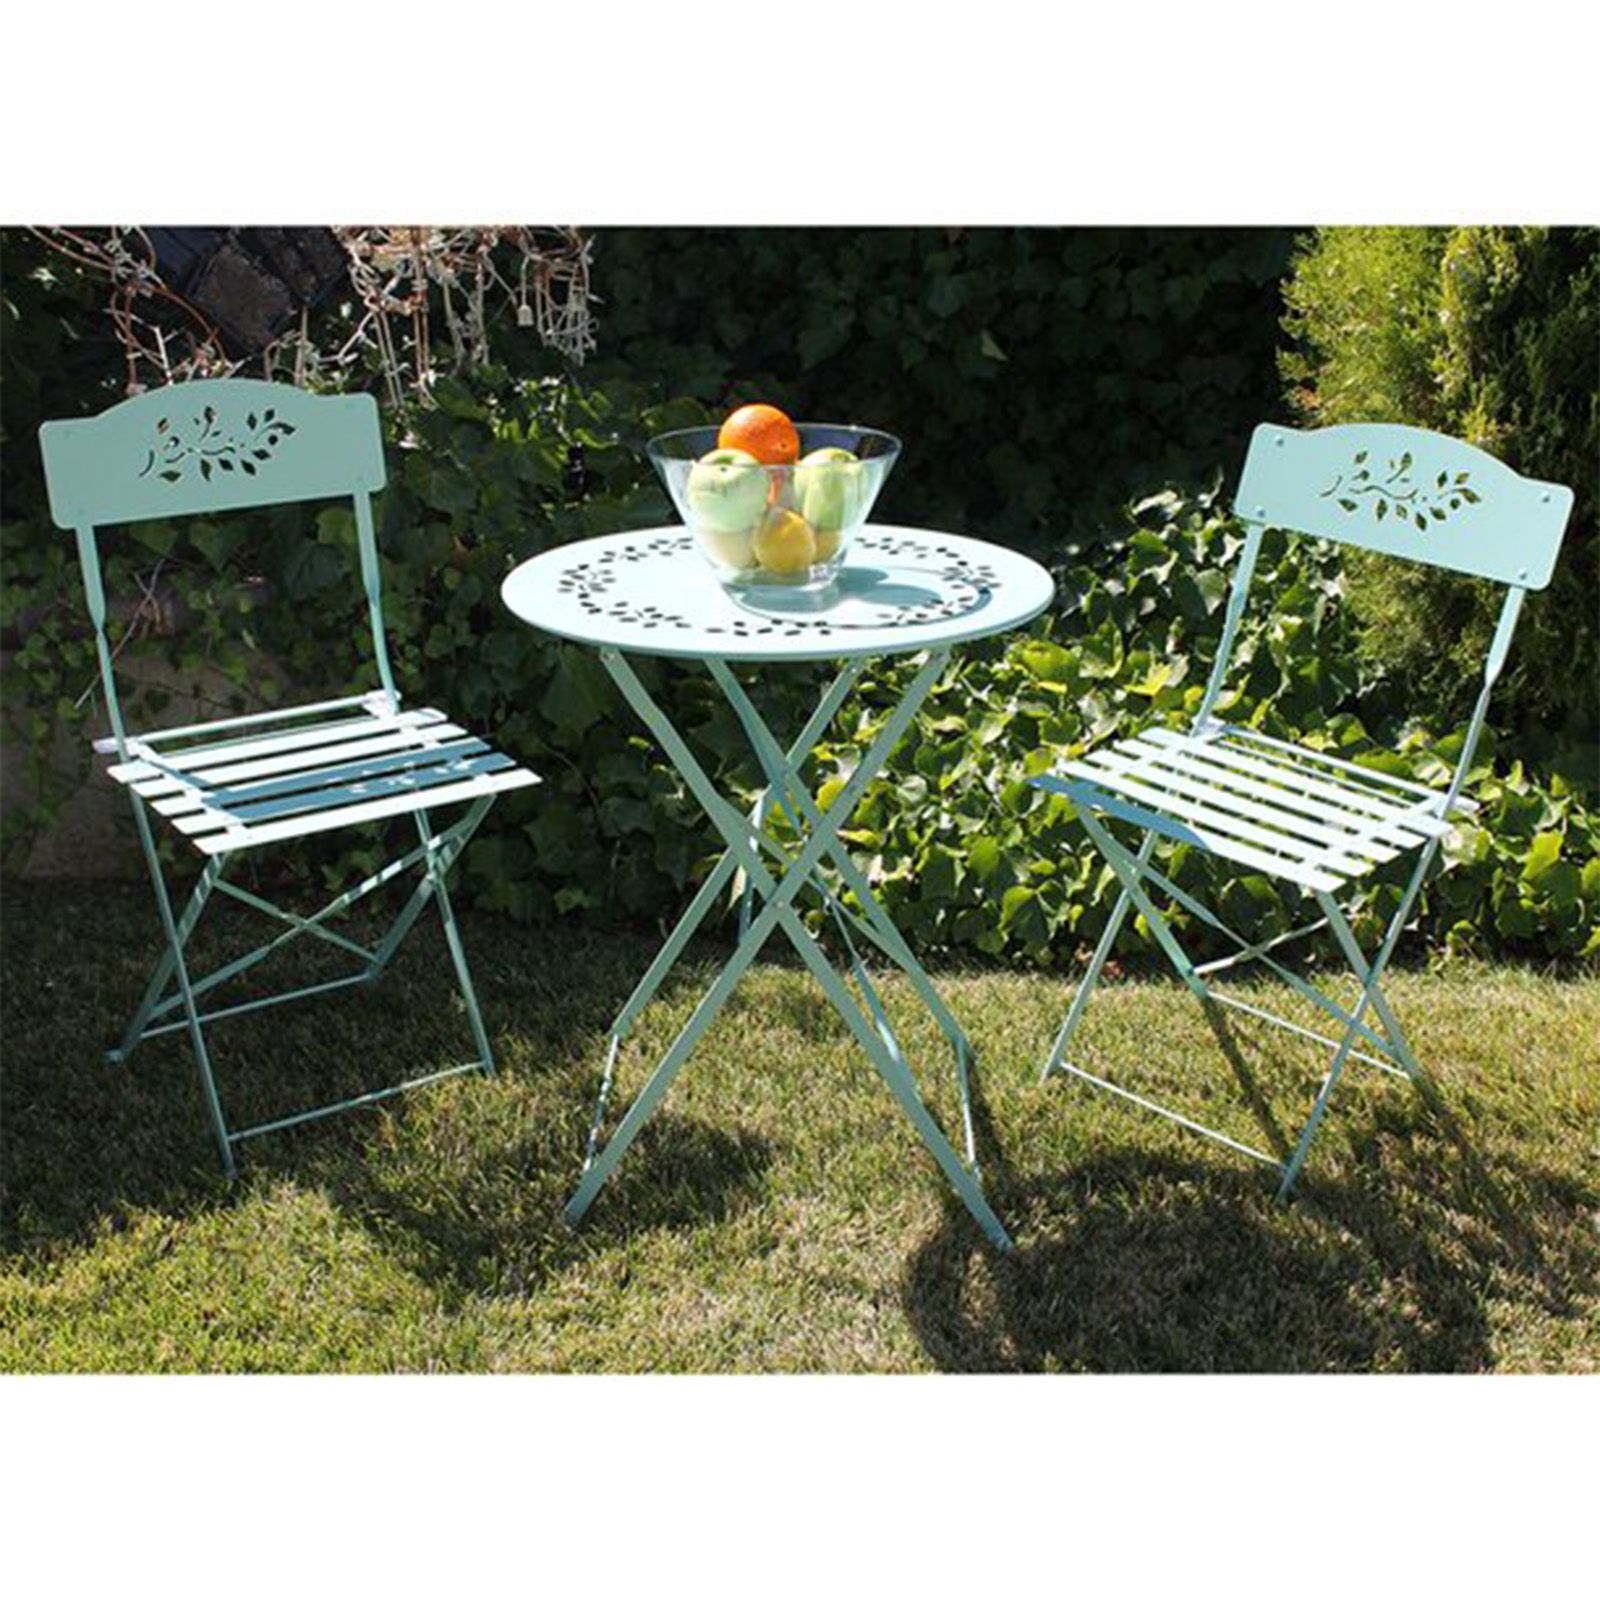 Metal Folding Bistro Set, 3 Piece Outdoor Furniture All Weather Pertaining To Widely Used Indoor Outdoor Conversation Sets (View 13 of 15)